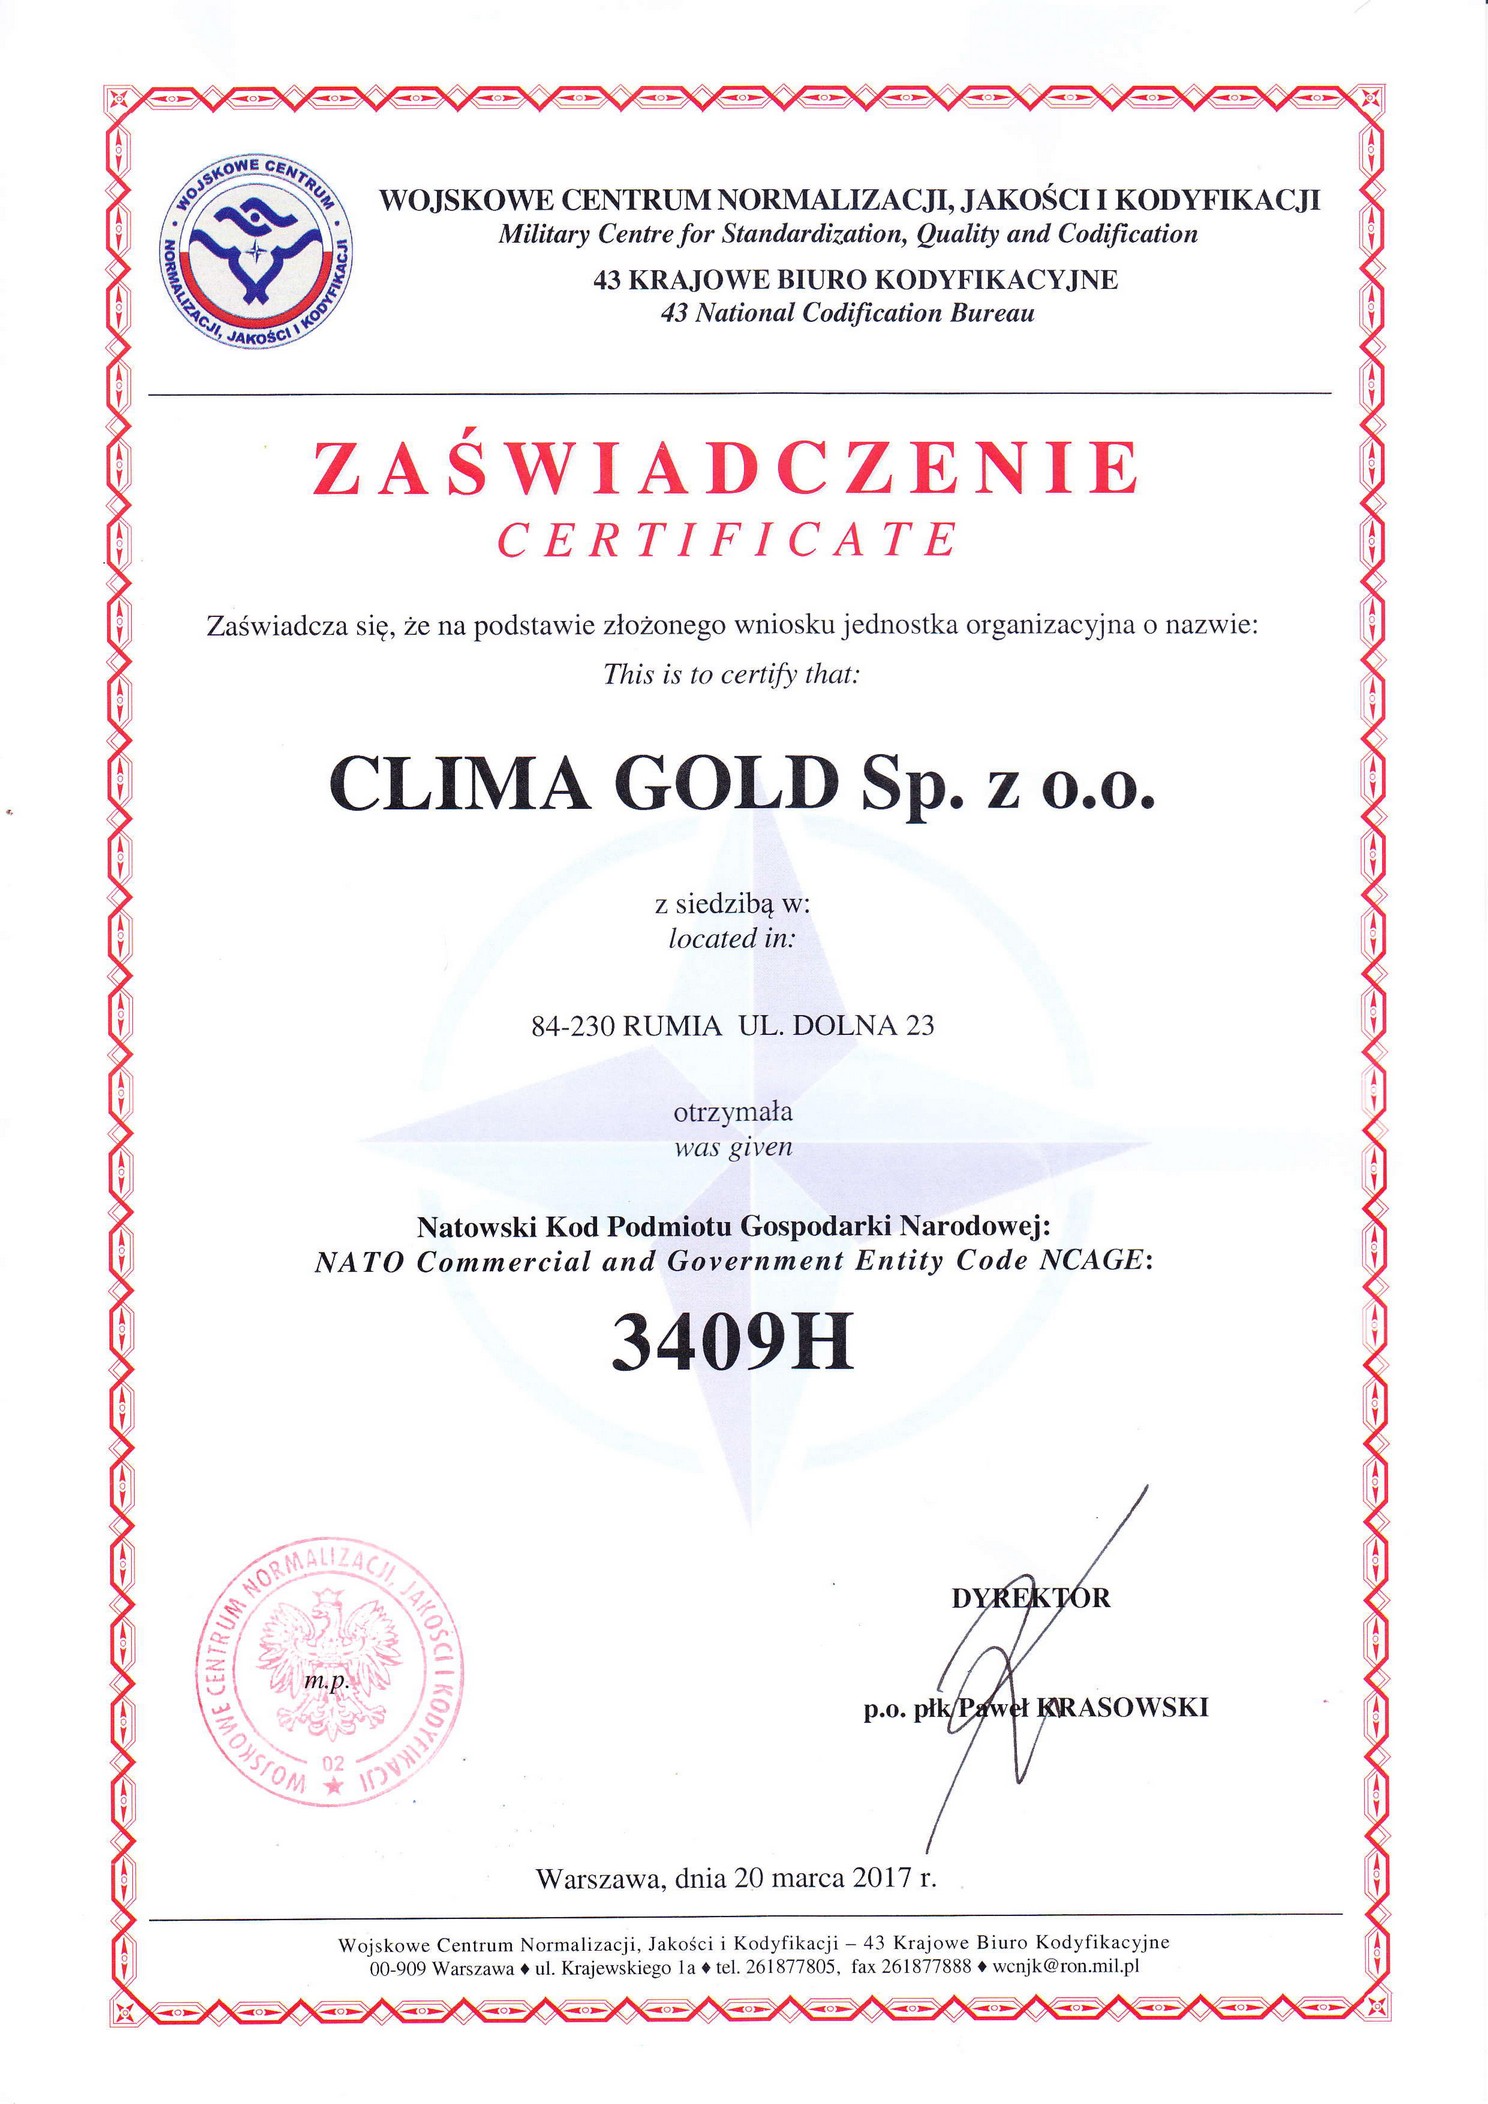 Clima Gold with NATO Commercial and Government Entity certificate